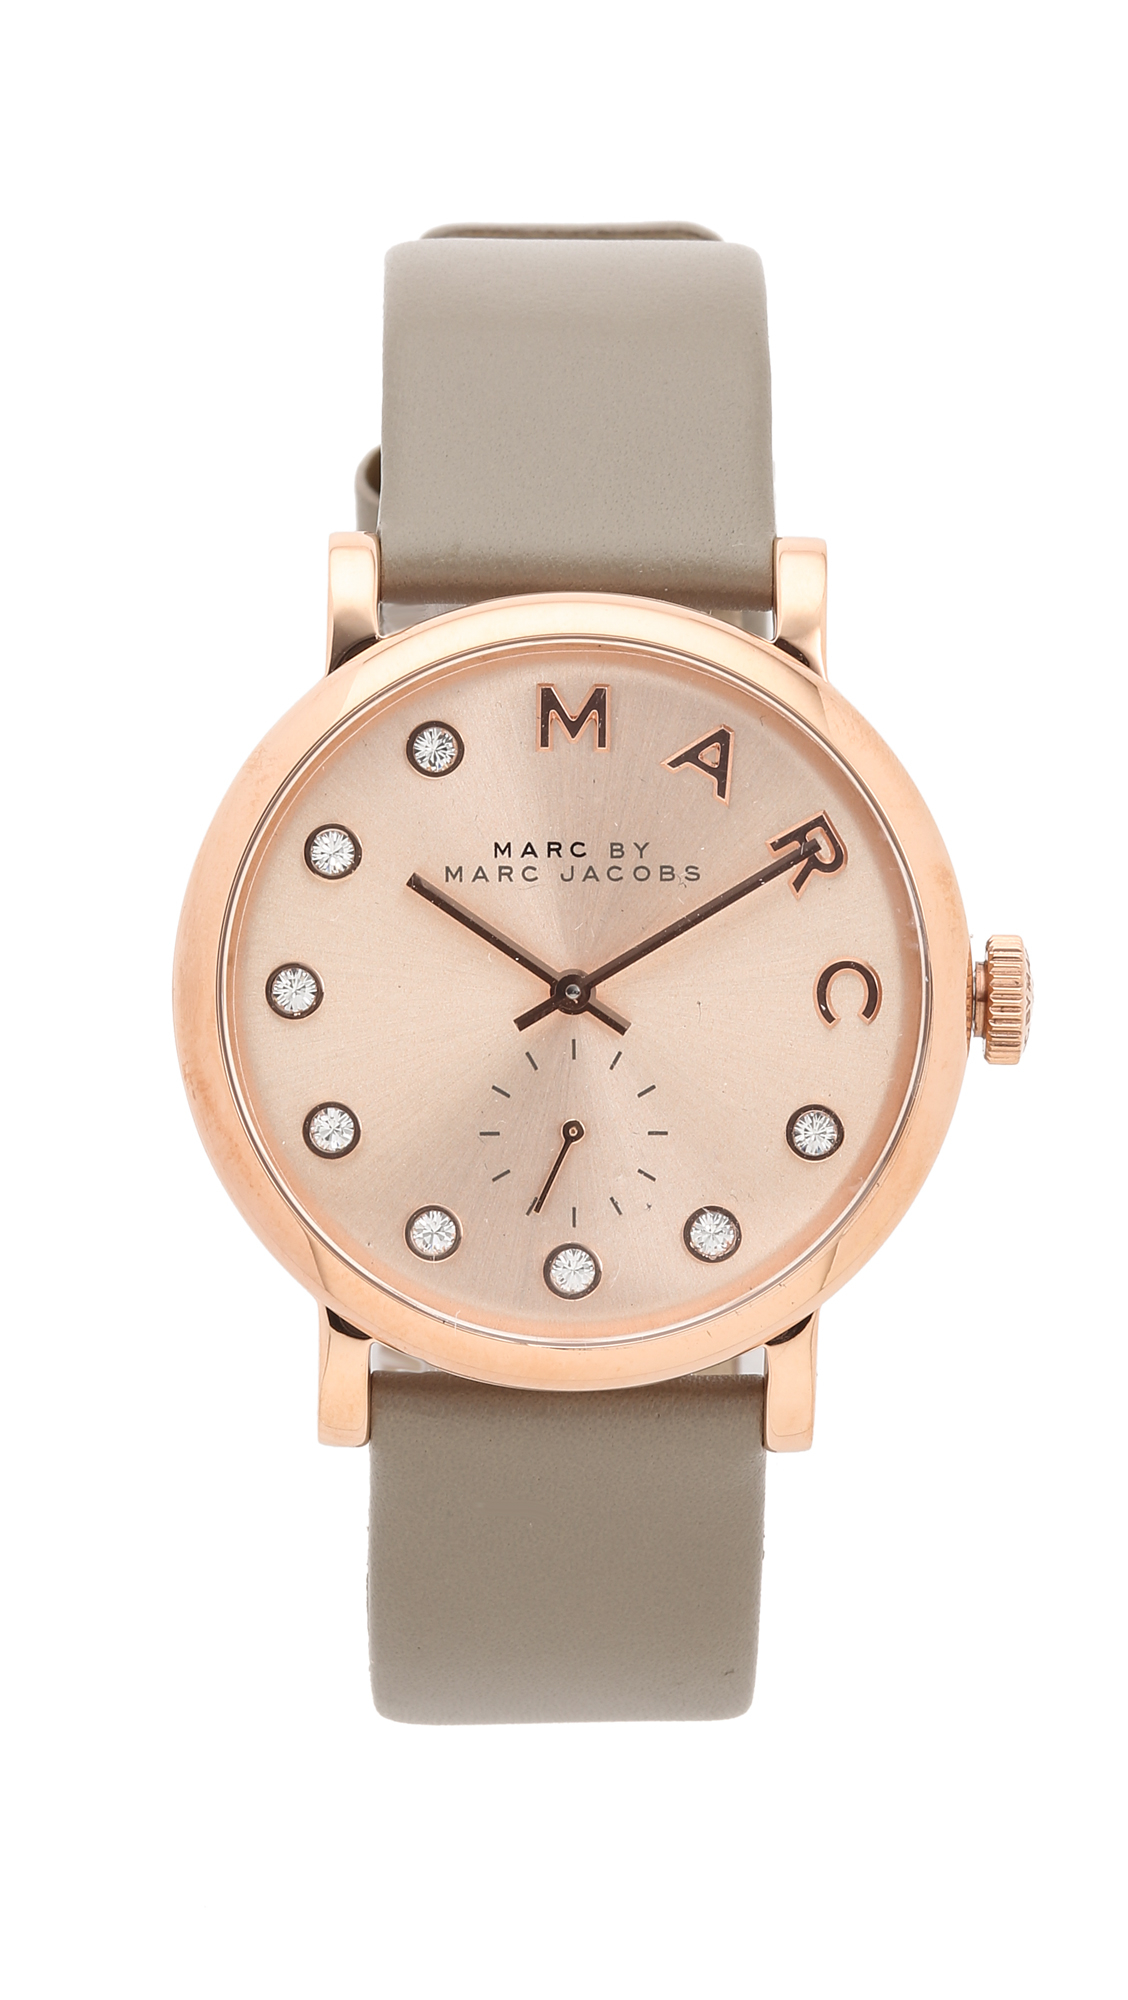 Marc by marc jacobs Baker Watch - Rose Gold/gravel Grey in Metallic | Lyst